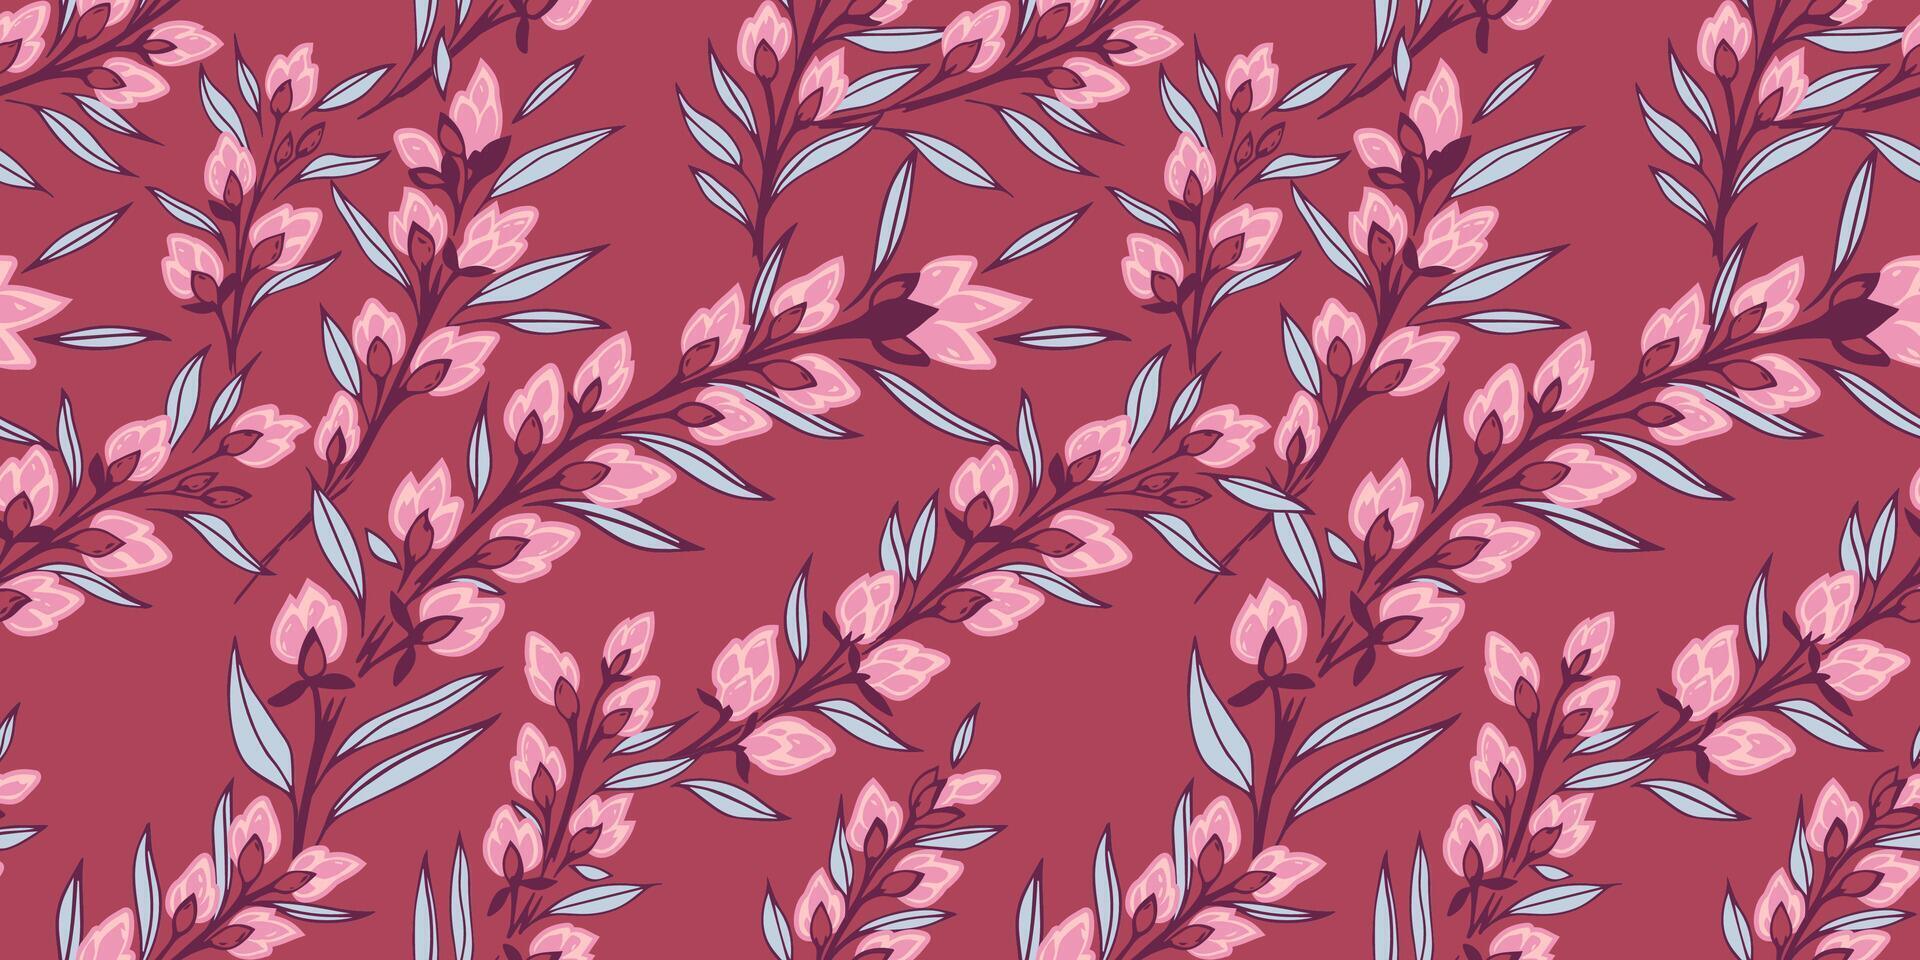 Abstract creative branches with leaves, buds flowers seamless pattern. Vector drawn illustration. Chic blooming floral stems printing. Stylized brown botanical background. Template for design